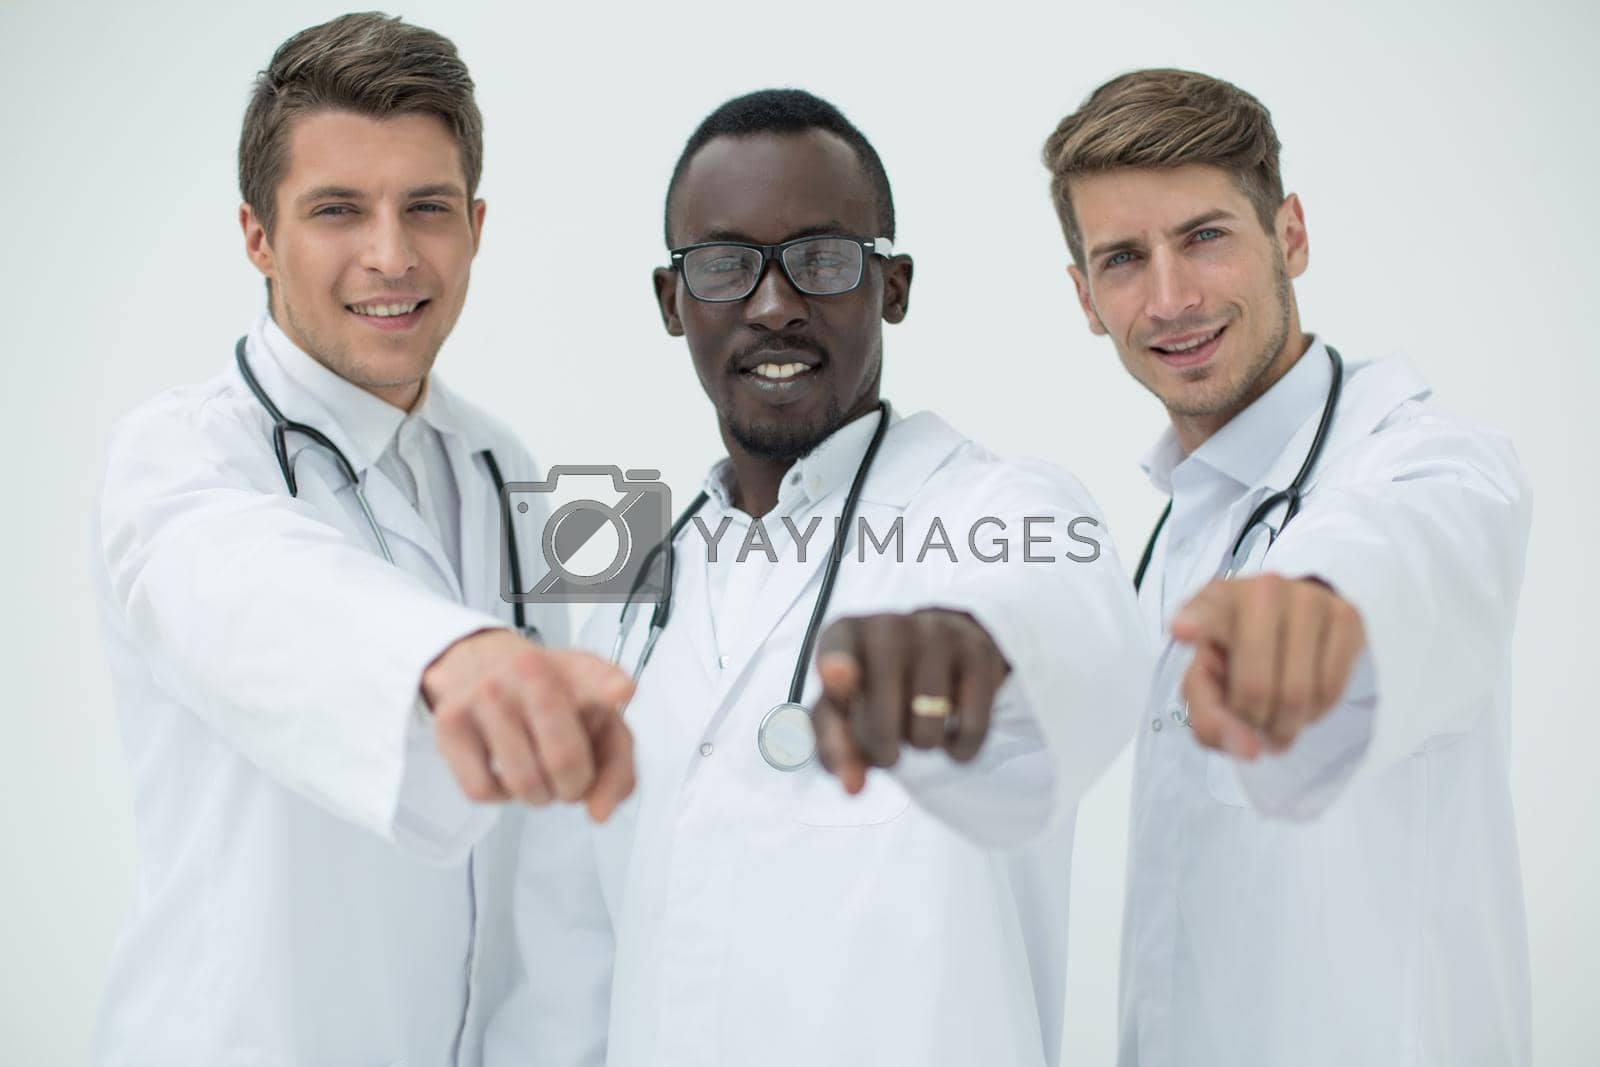 Royalty free image of multinational group of doctors pointing at you by asdf